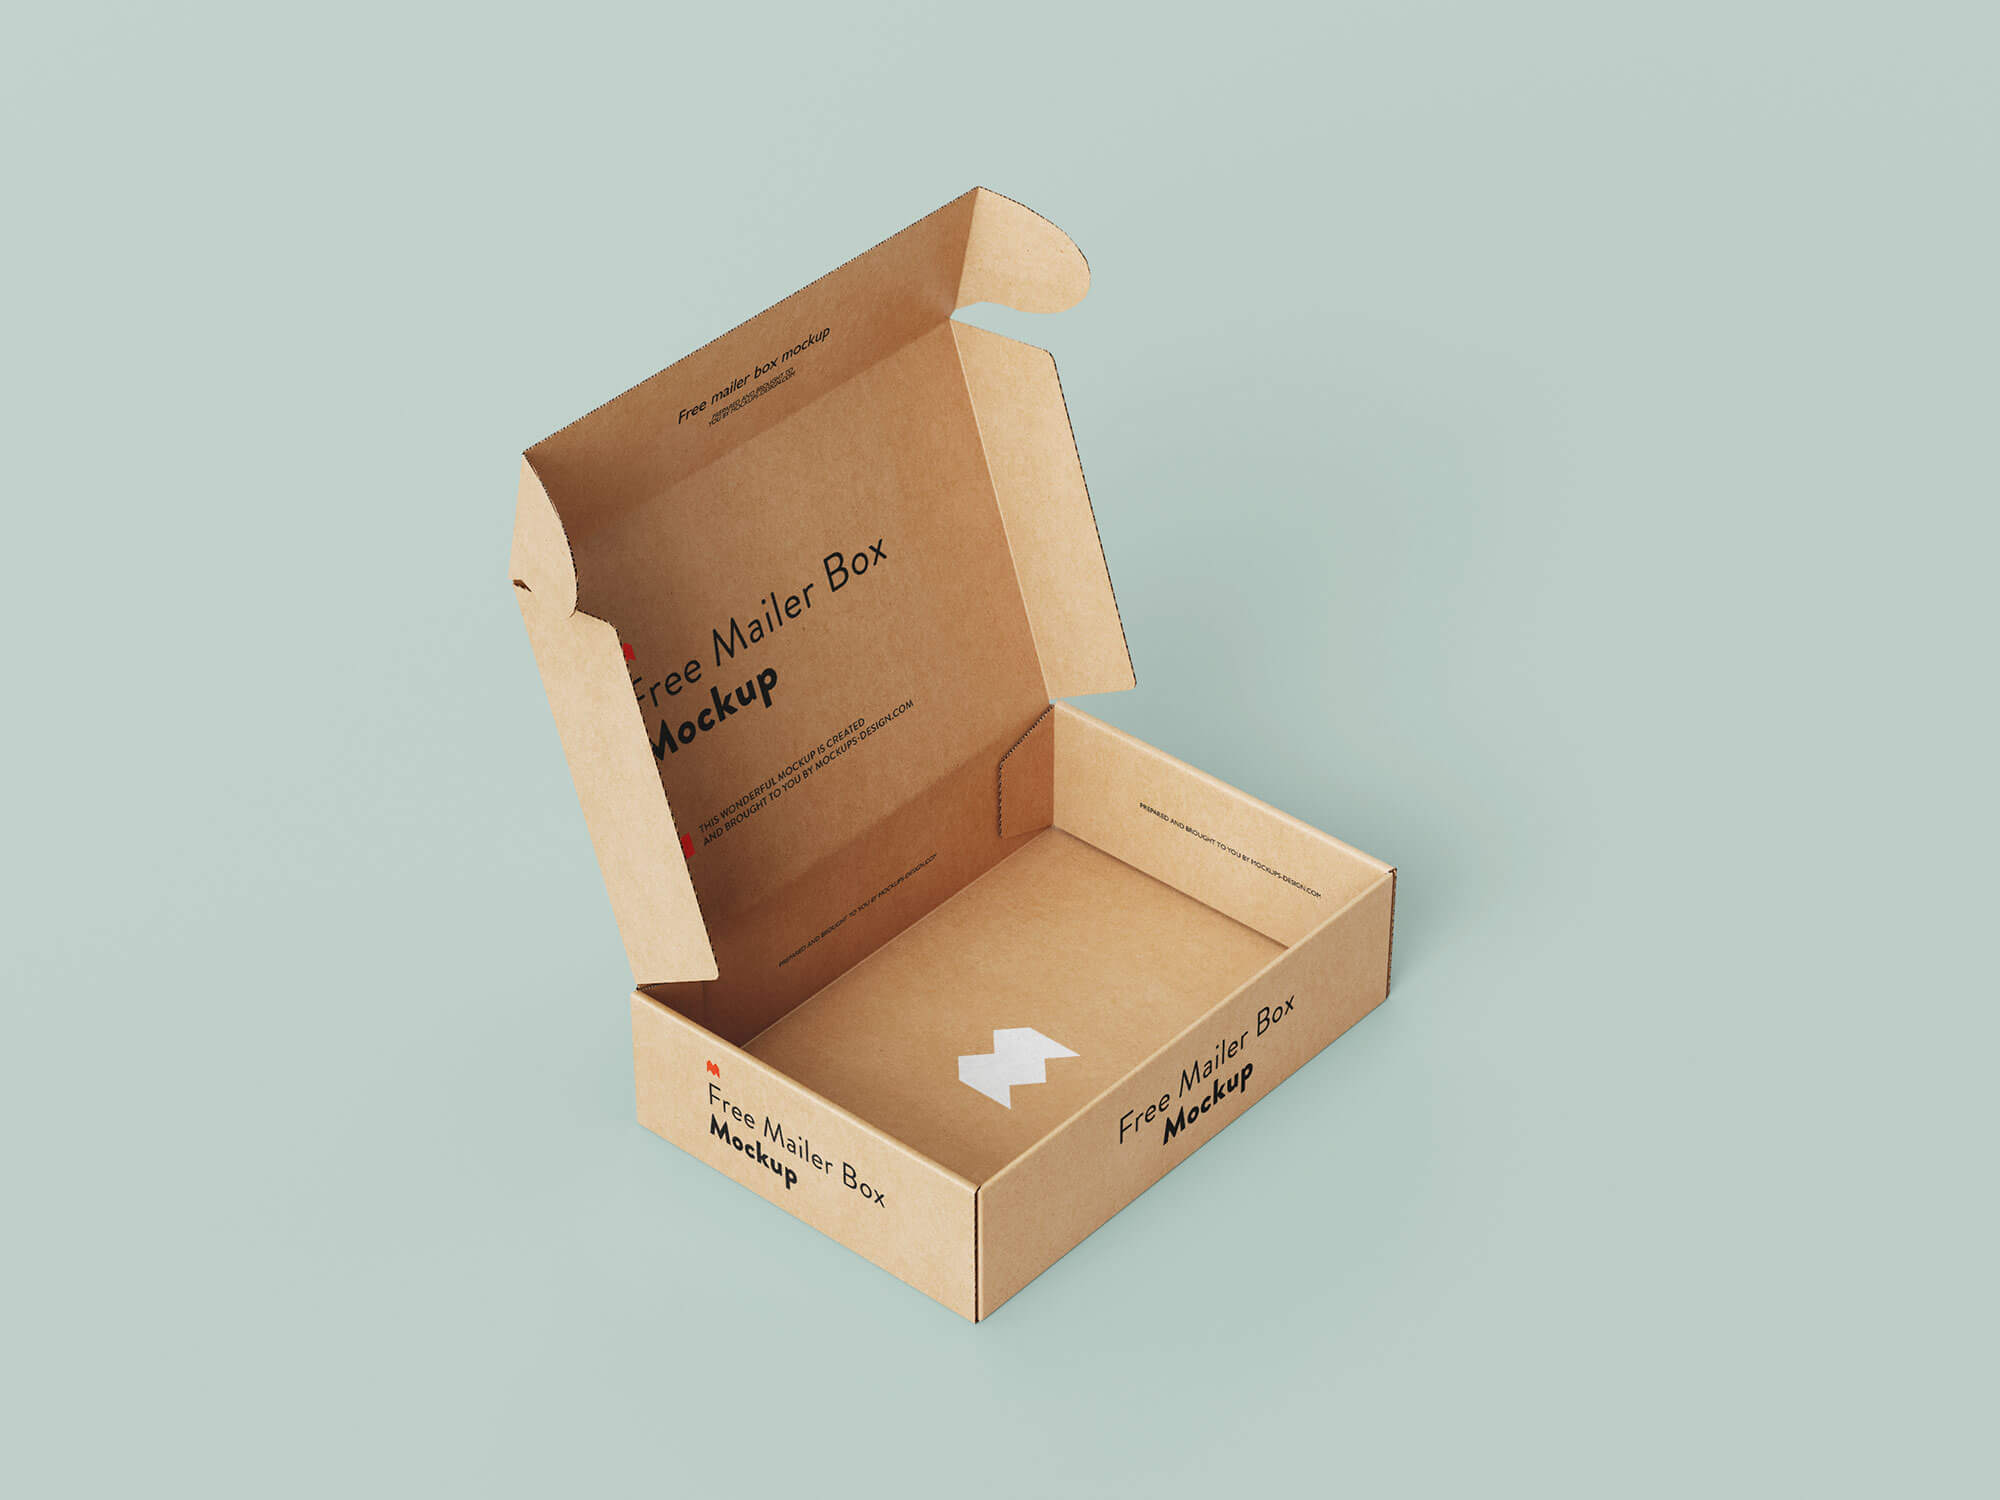 Free Delivery Shipping Mailer Box Mockup PSD Set (1)